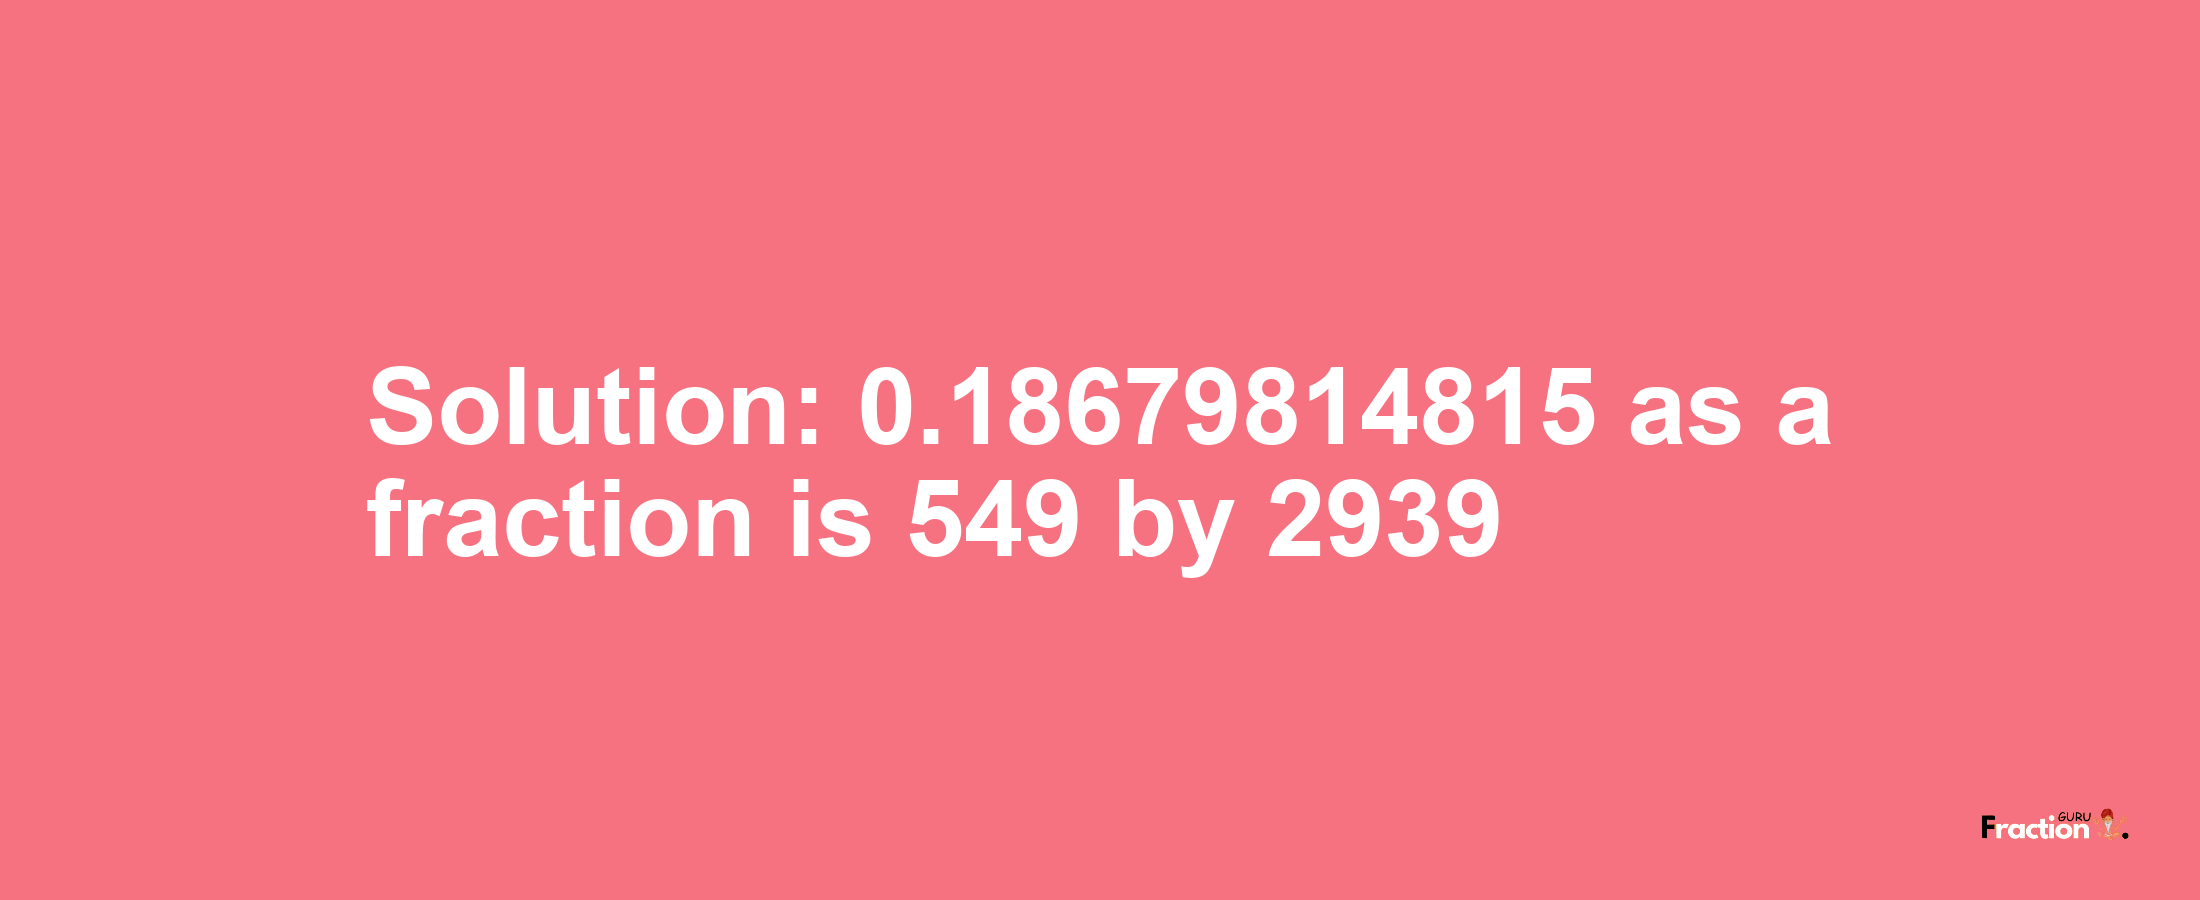 Solution:0.18679814815 as a fraction is 549/2939